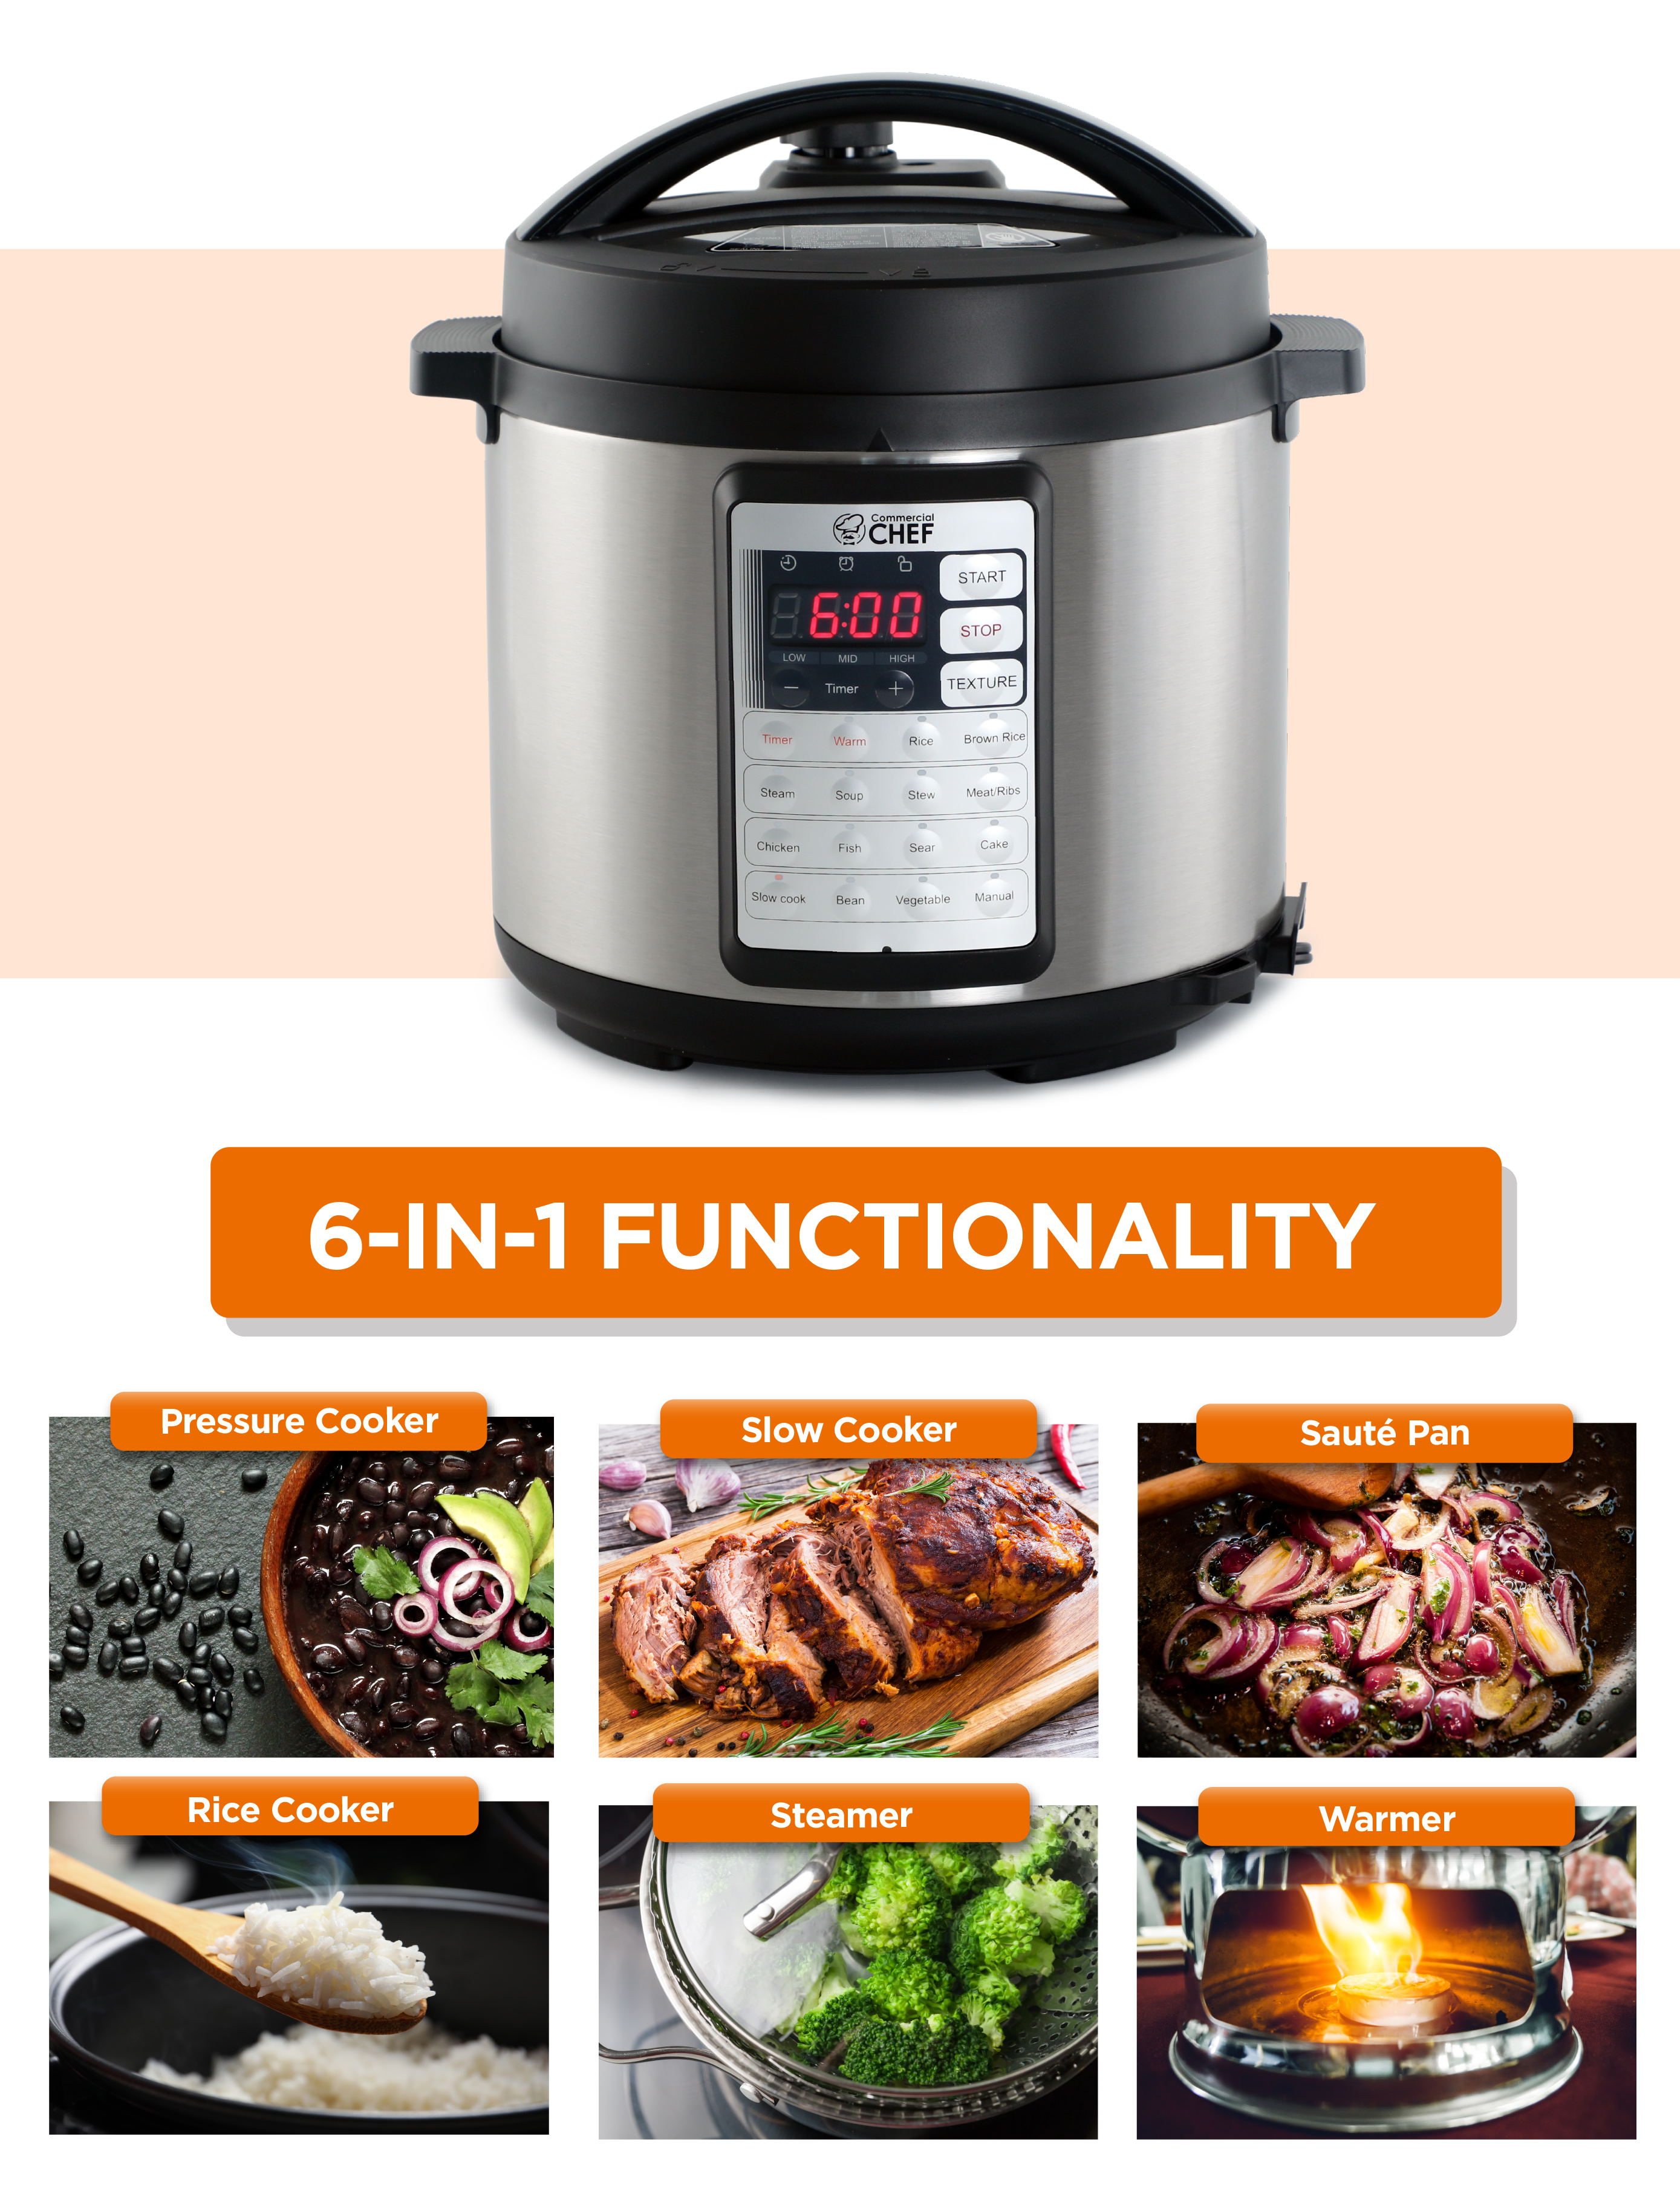 Commercial Chef 6.3-Quart 13-in-1 Electric Pressure Cooker, Stainless Steel - image 6 of 6